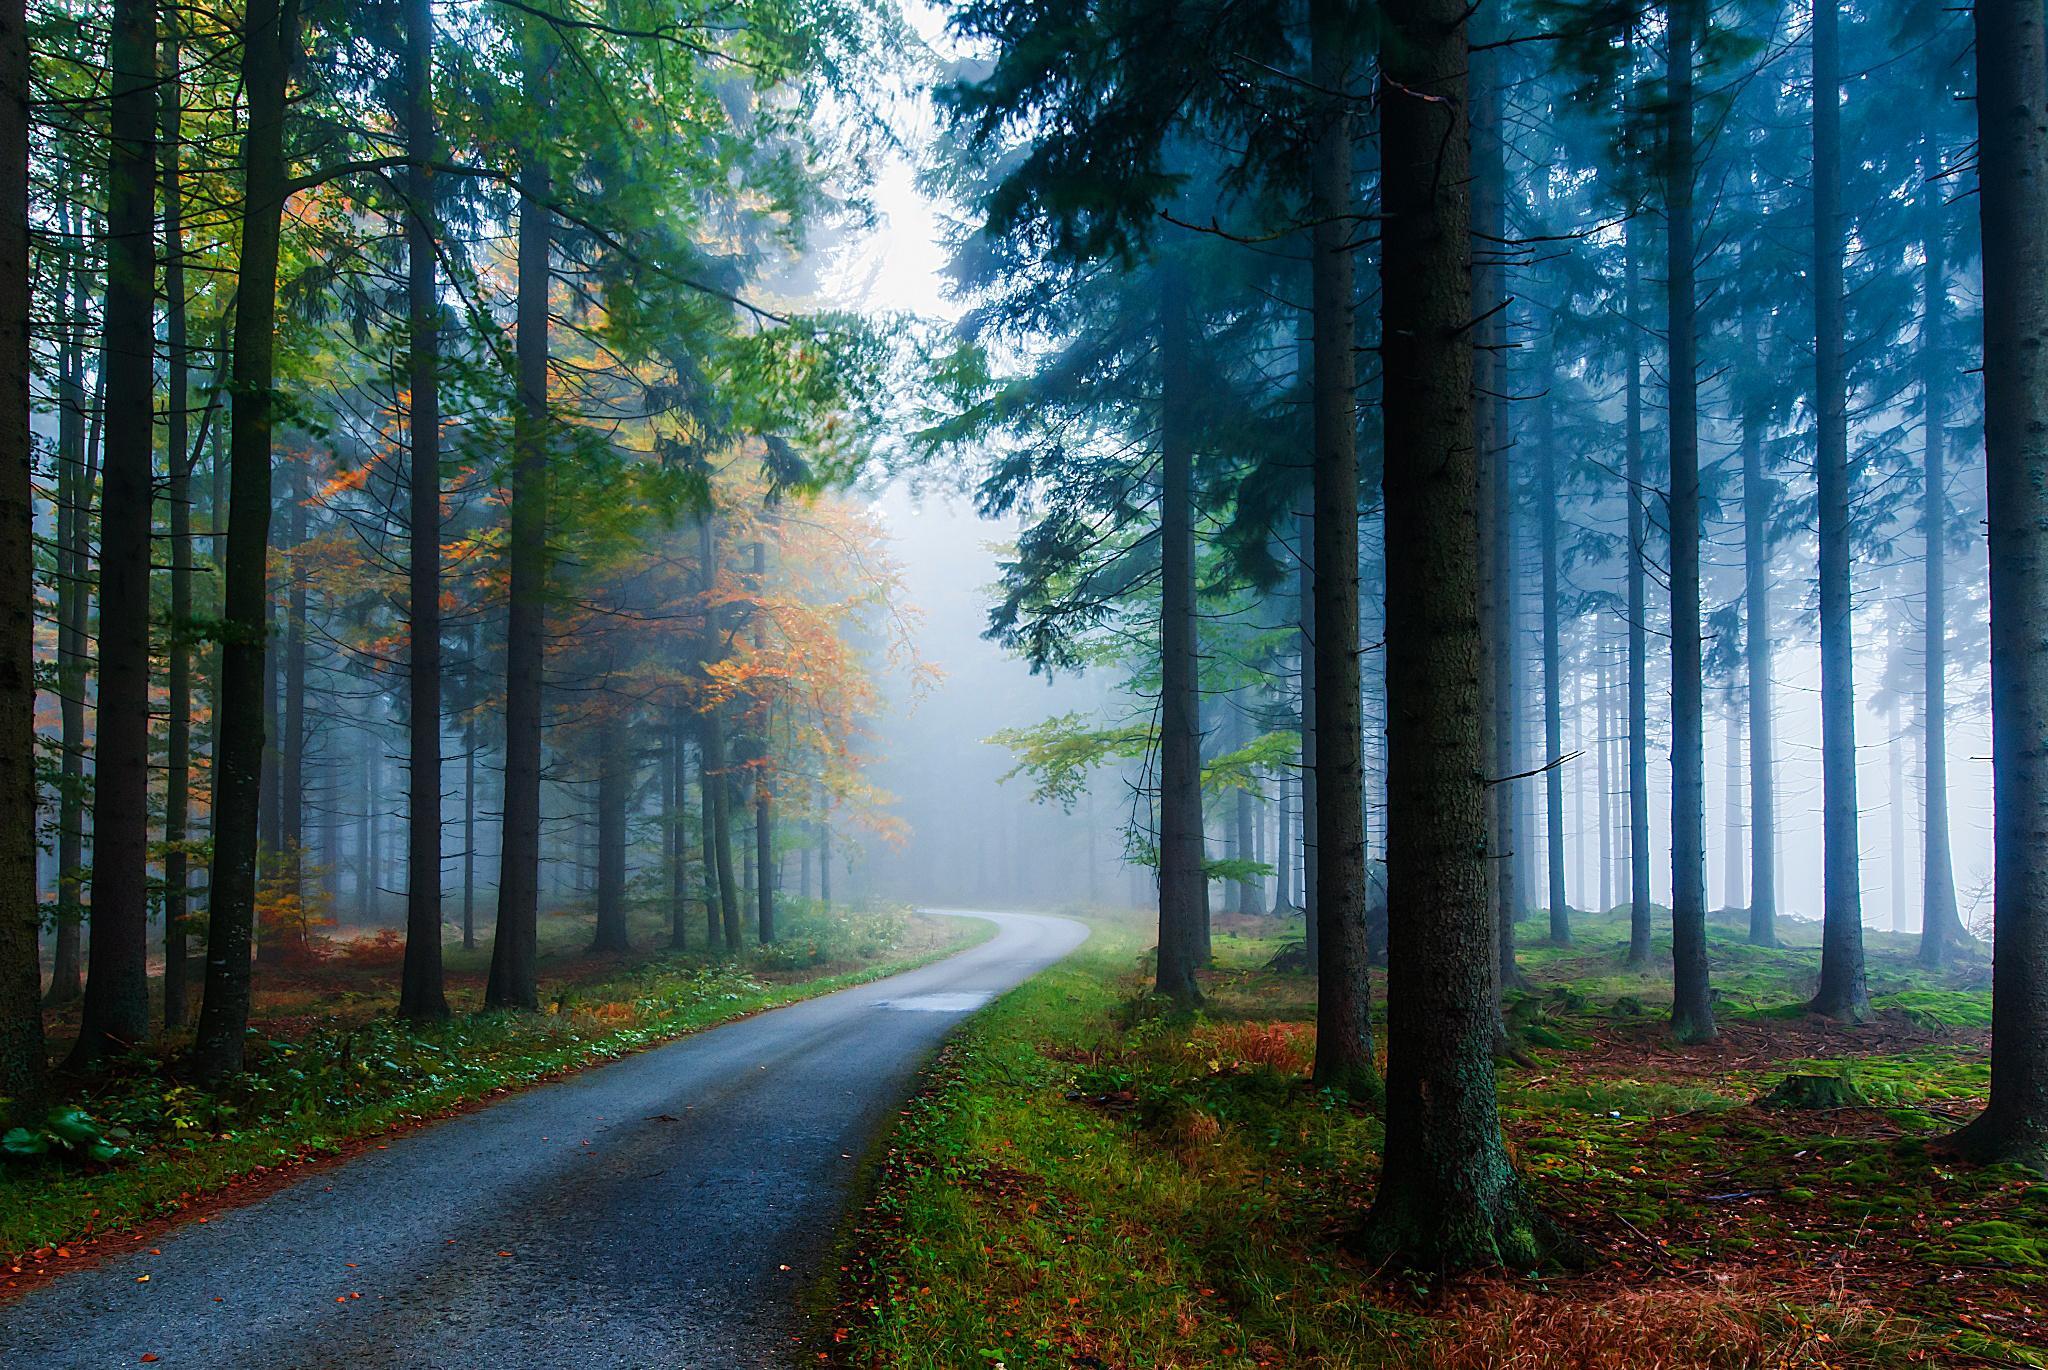 Forest Road on Misty Morning HD Wallpaper. Background Image